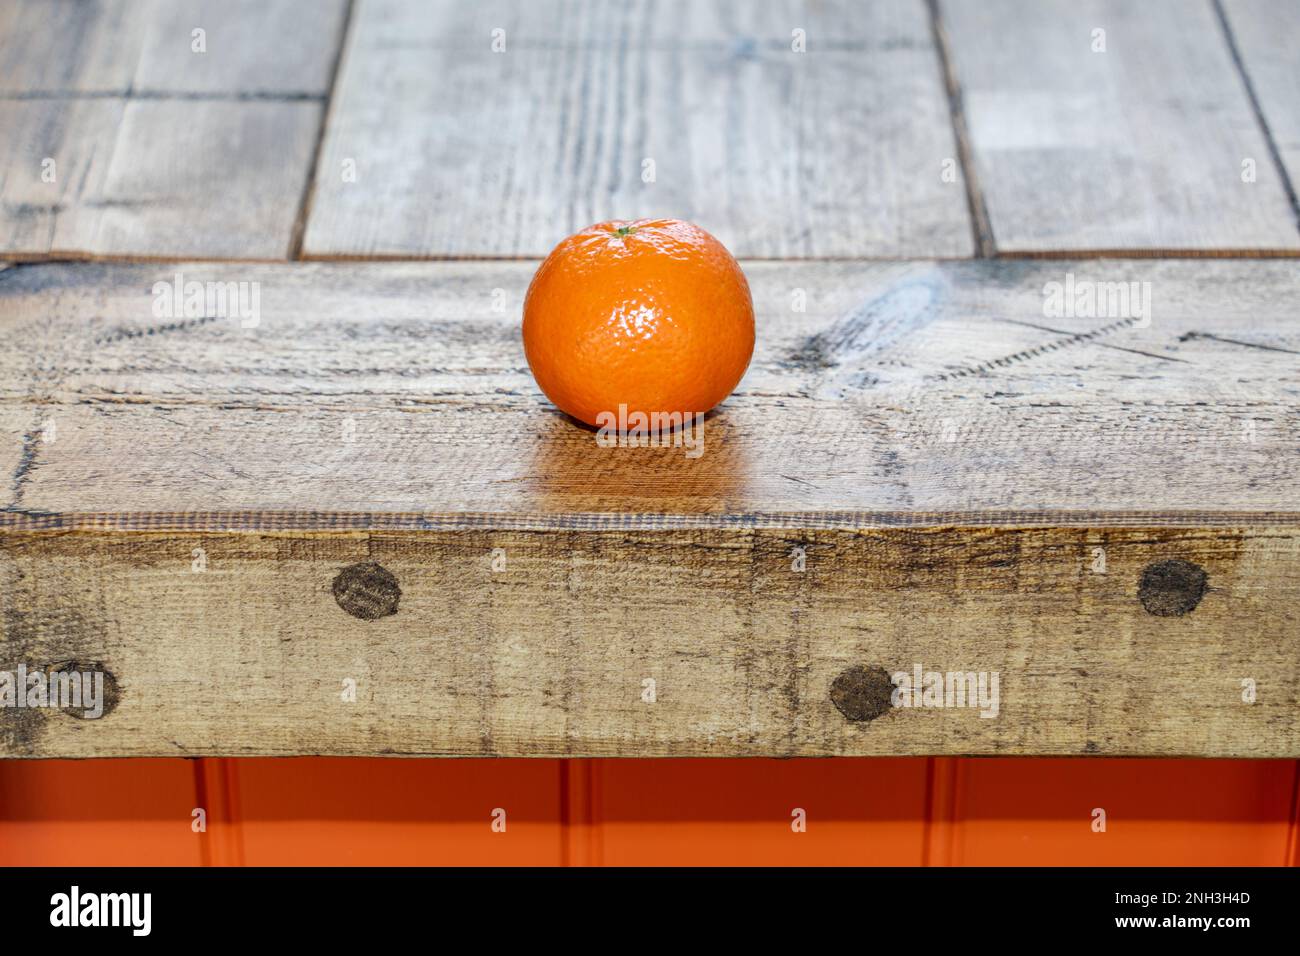 An organic satsuma on the edge of a rough wooden butcher's block with orange sides. Concept of healthy eating lifestyle kitchen. Stock Photo